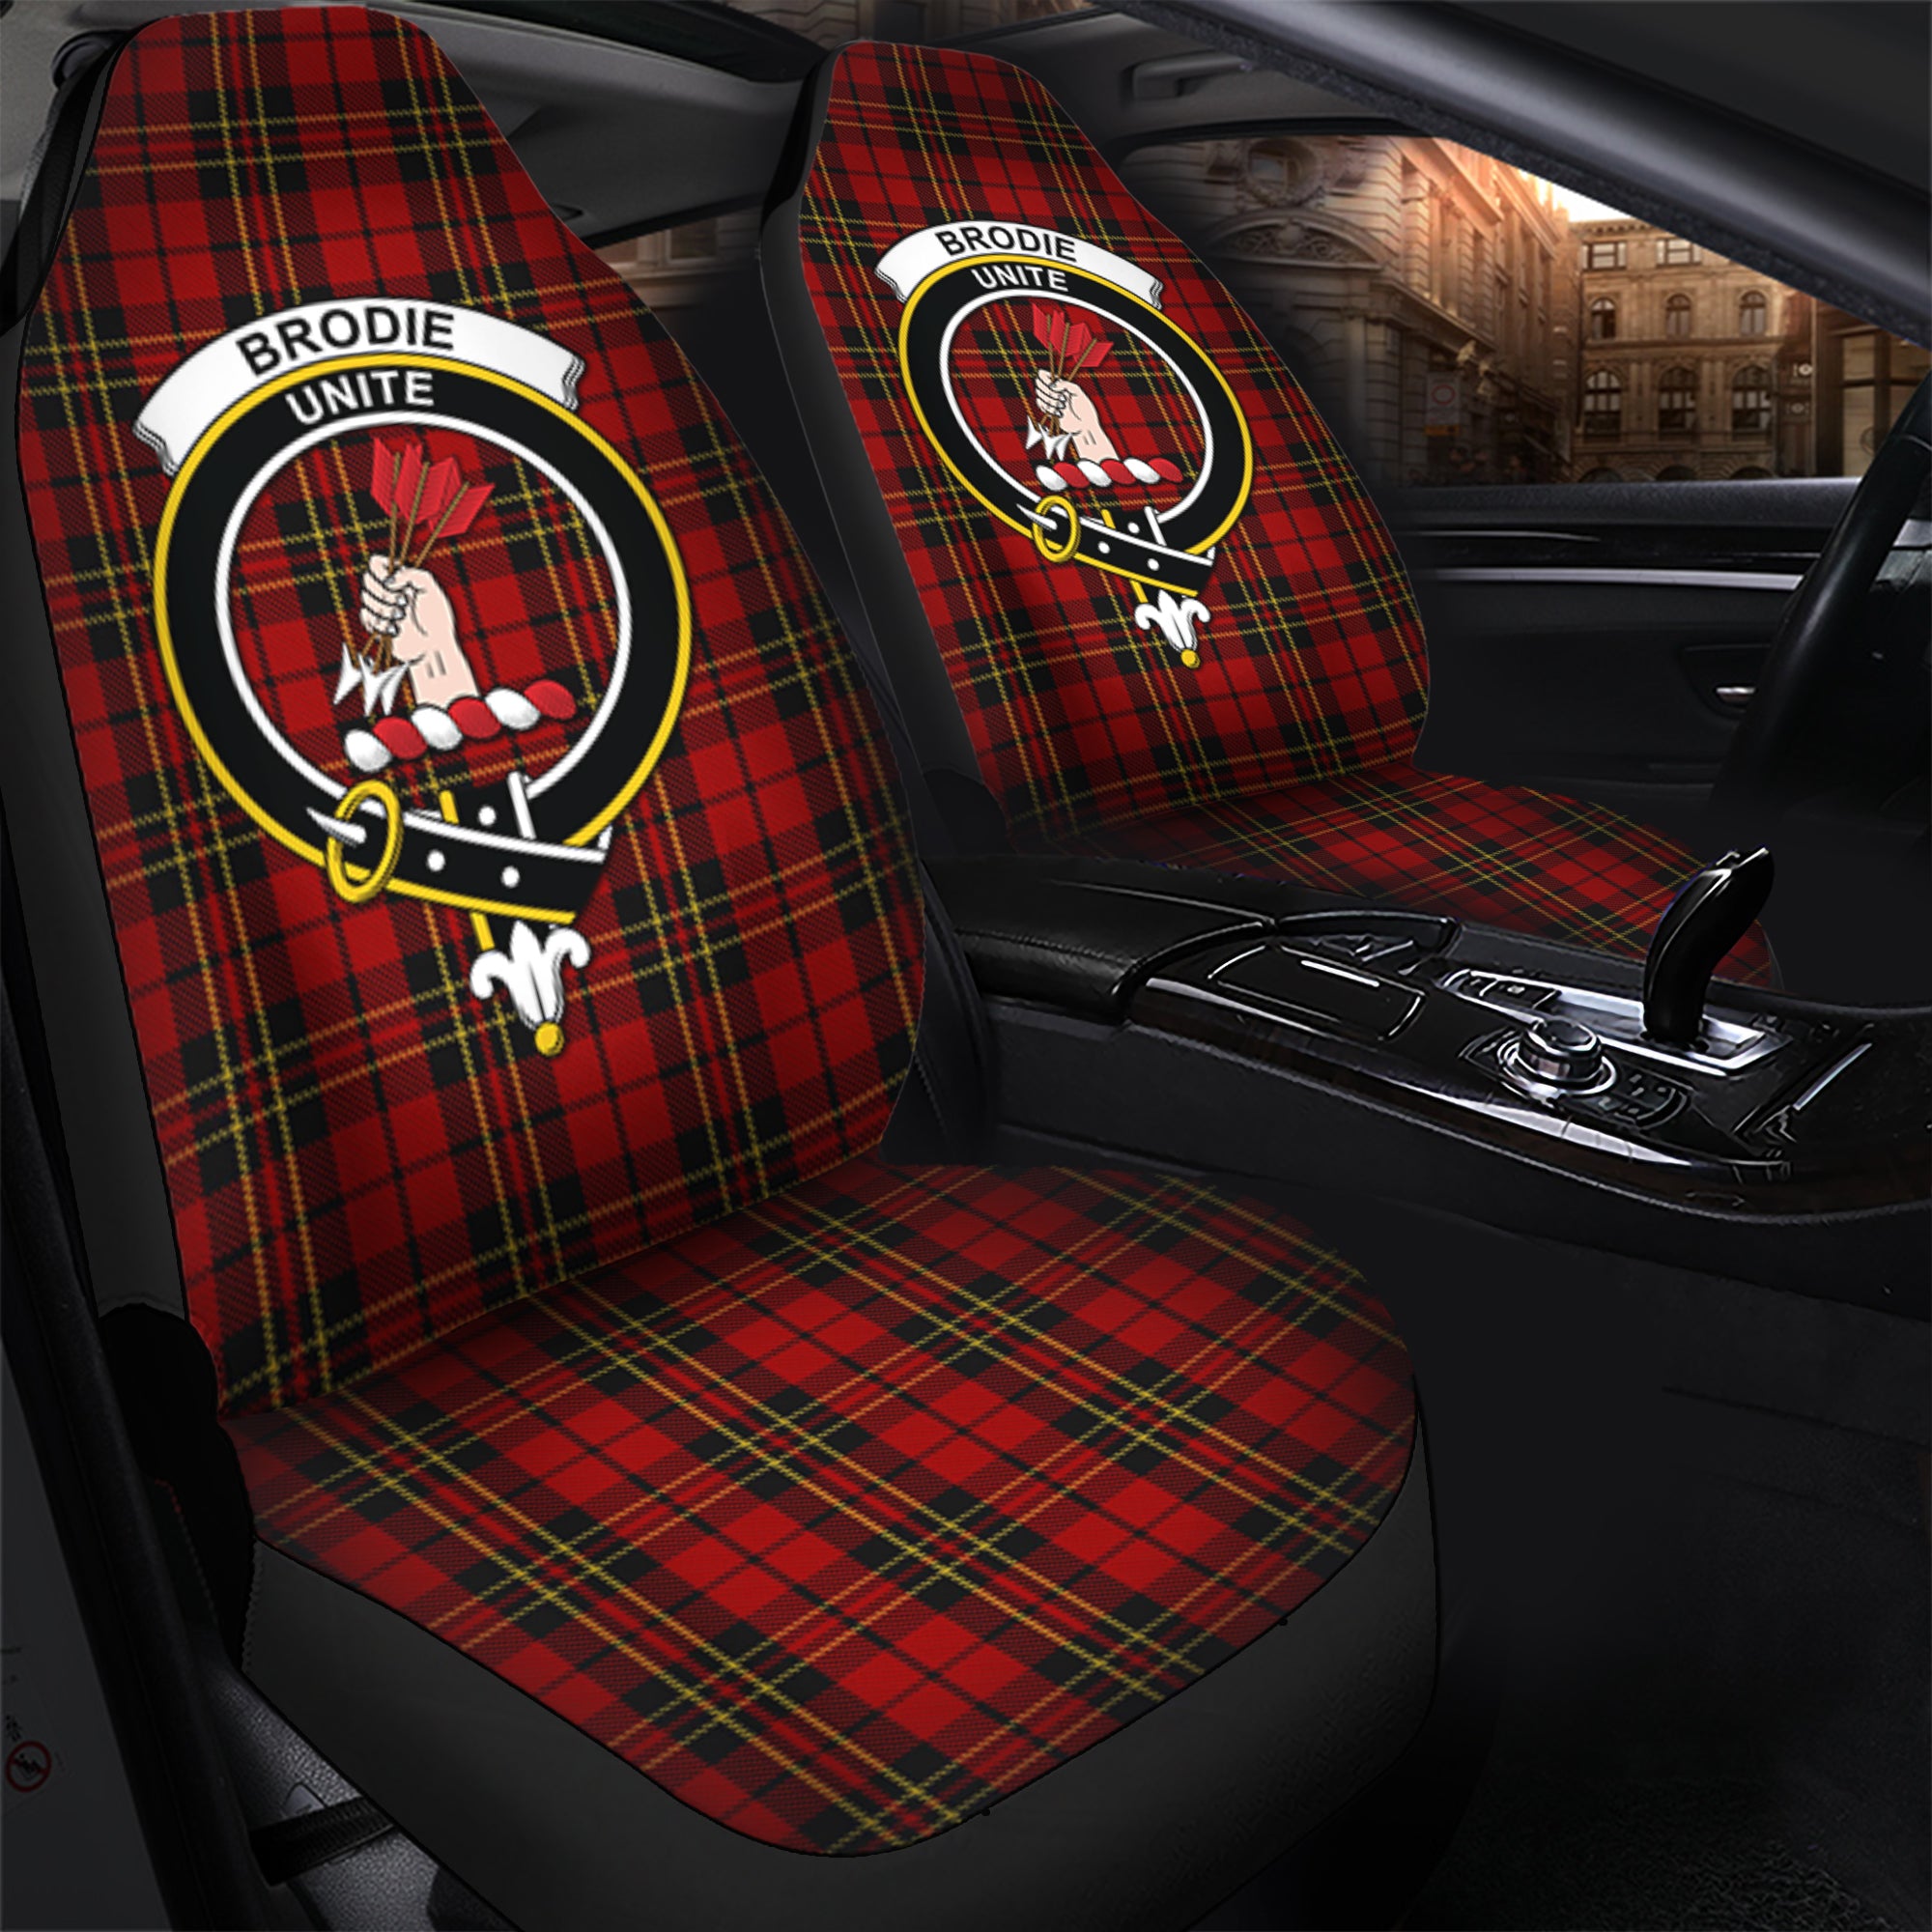 Brodie Clan Tartan Car Seat Cover, Family Crest Tartan Seat Cover TS23